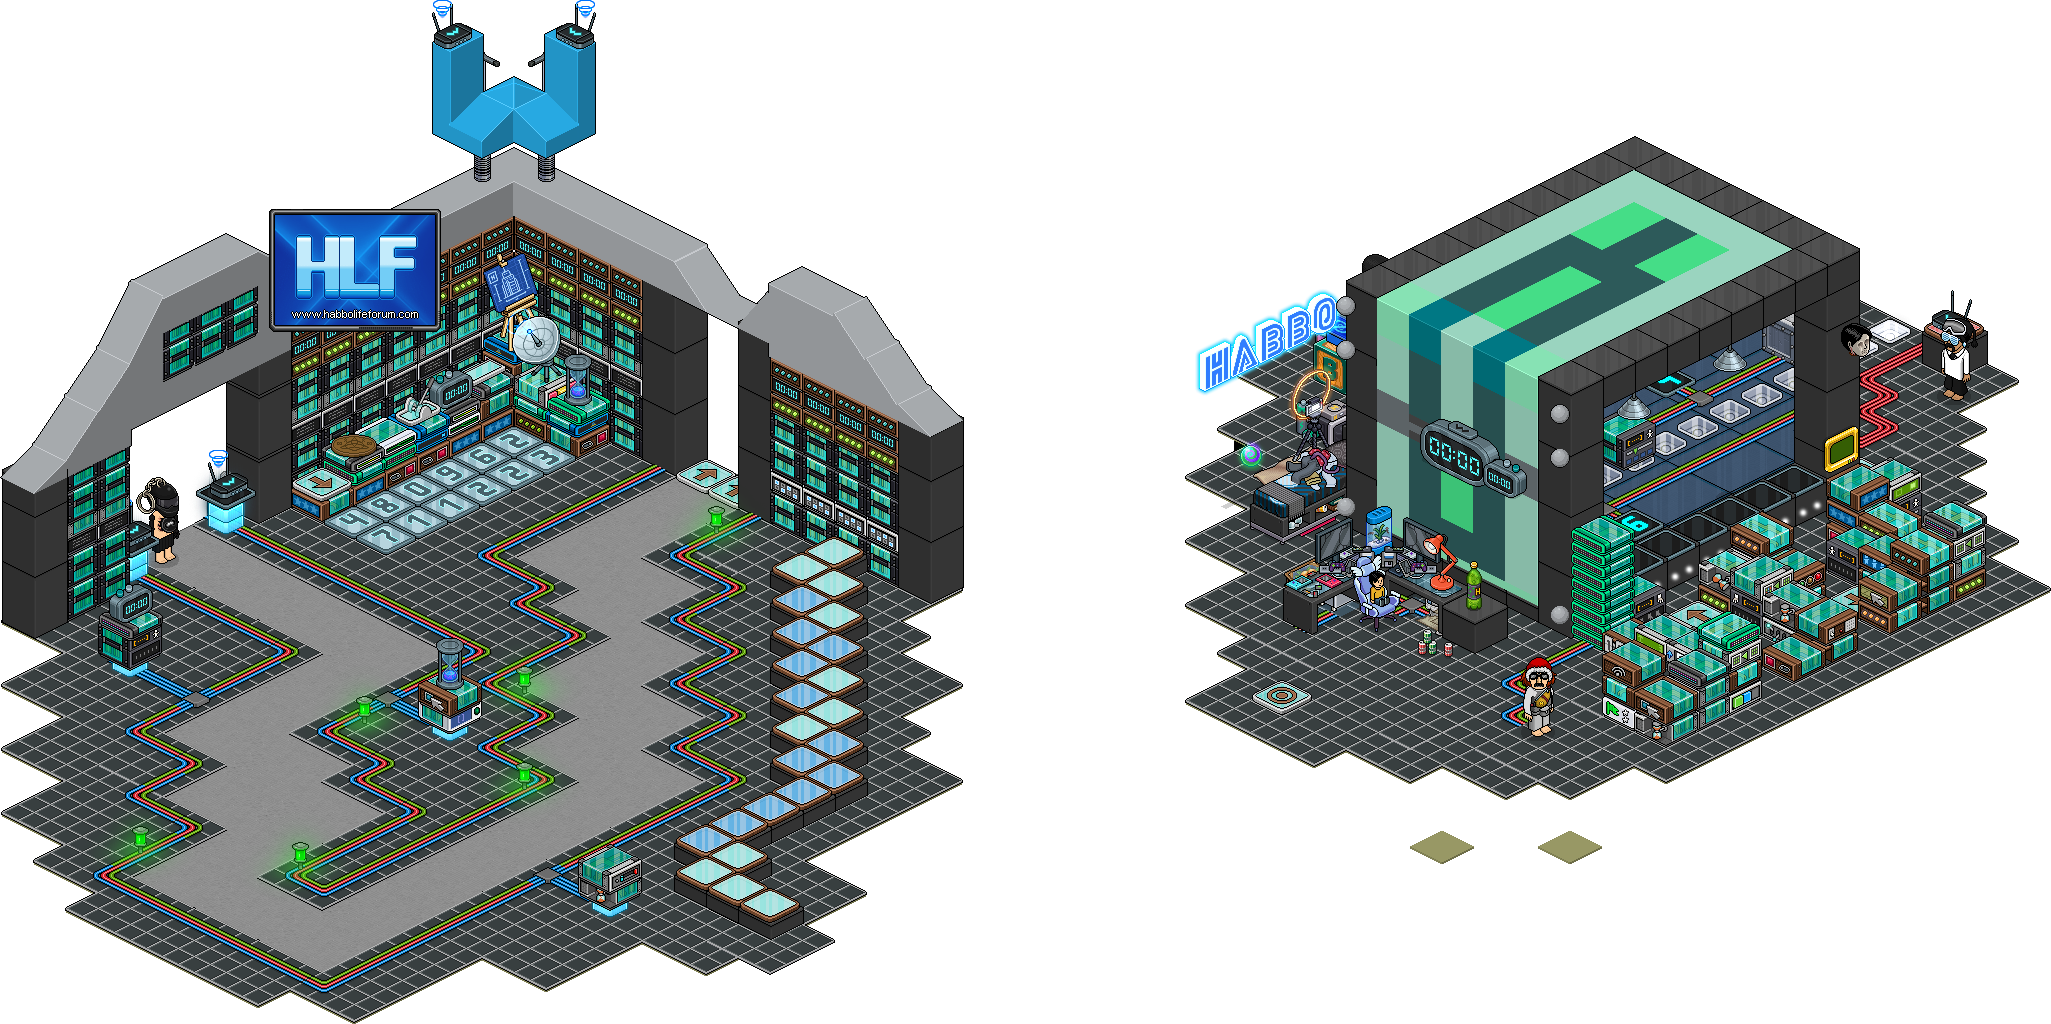 wired - [IT] Gioco Wired Expert su Habbo.it #2 - Pagina 2 Hlf_wi11